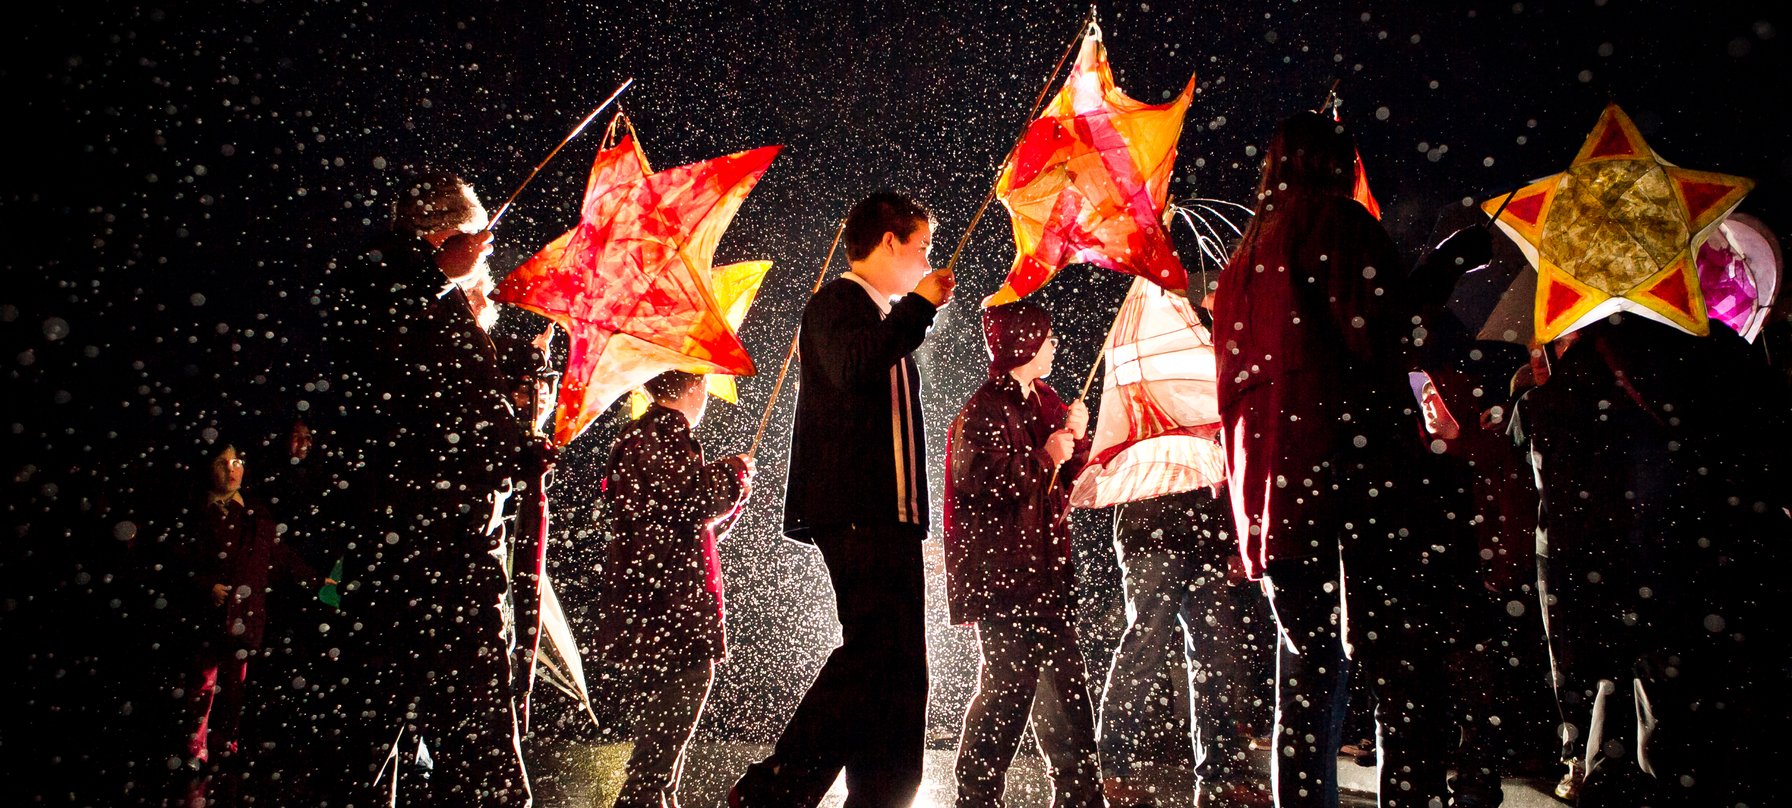 A photo of the lantern march during the North Mt Lyell Disaster Centenary 2012, credit Kim Eijdenberg.